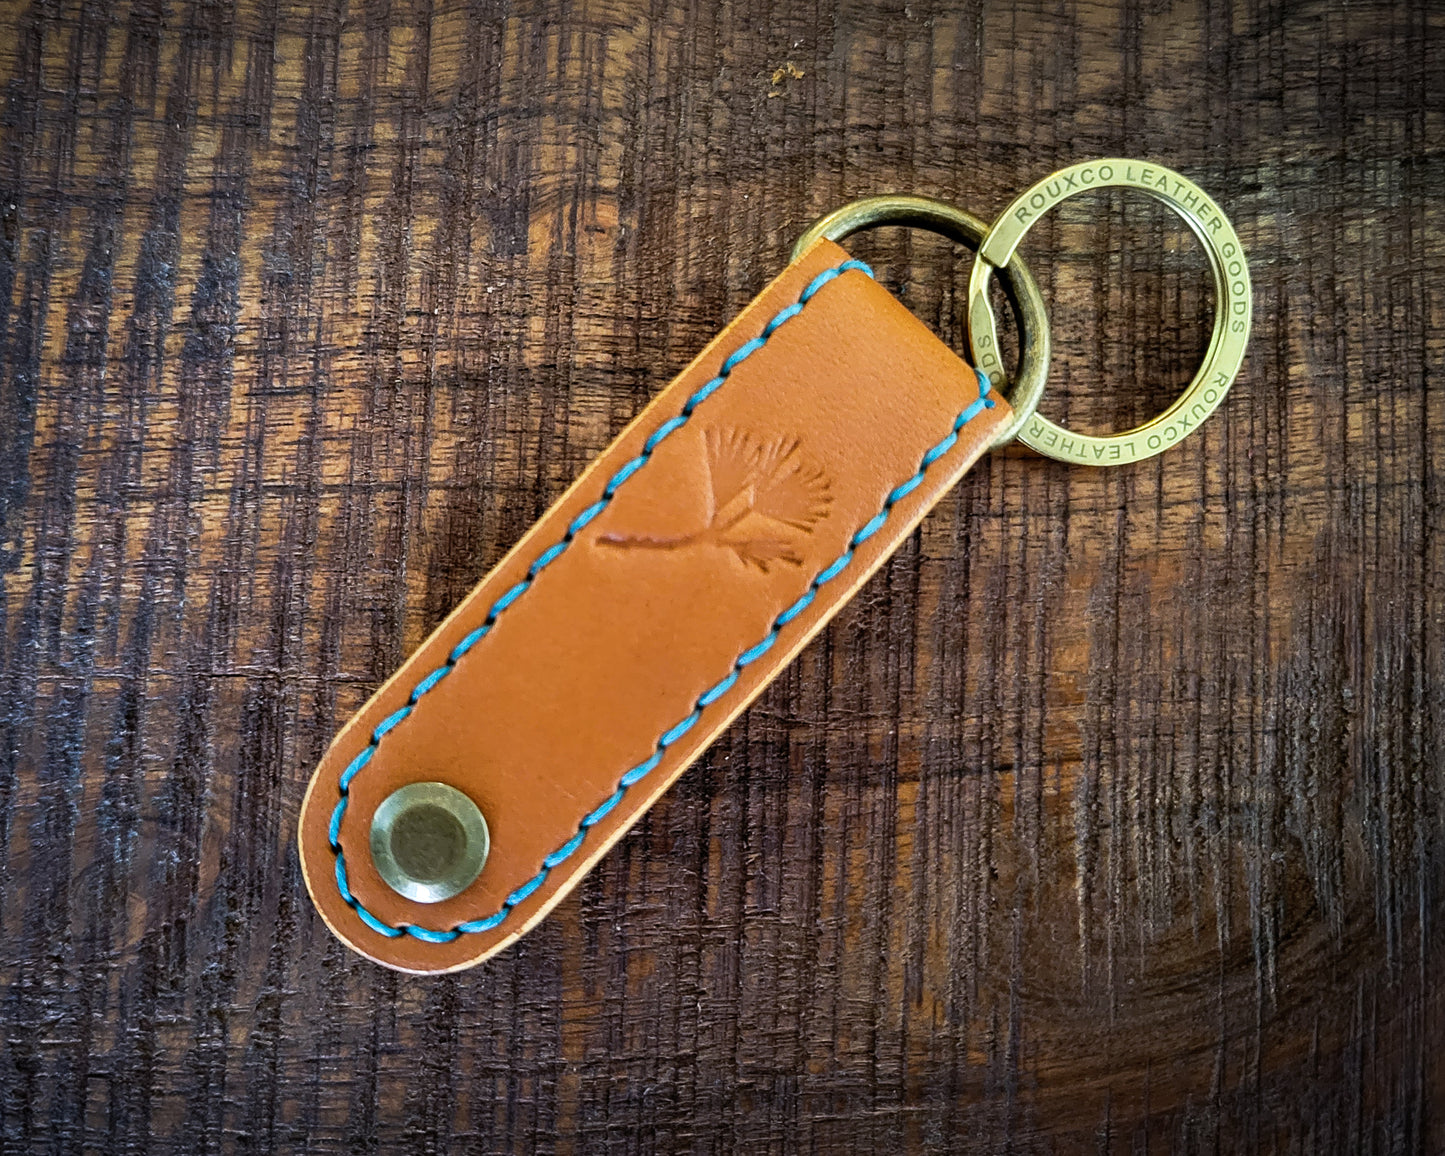 Tan Leather EDC Key Organizer stitched with turquoise thread